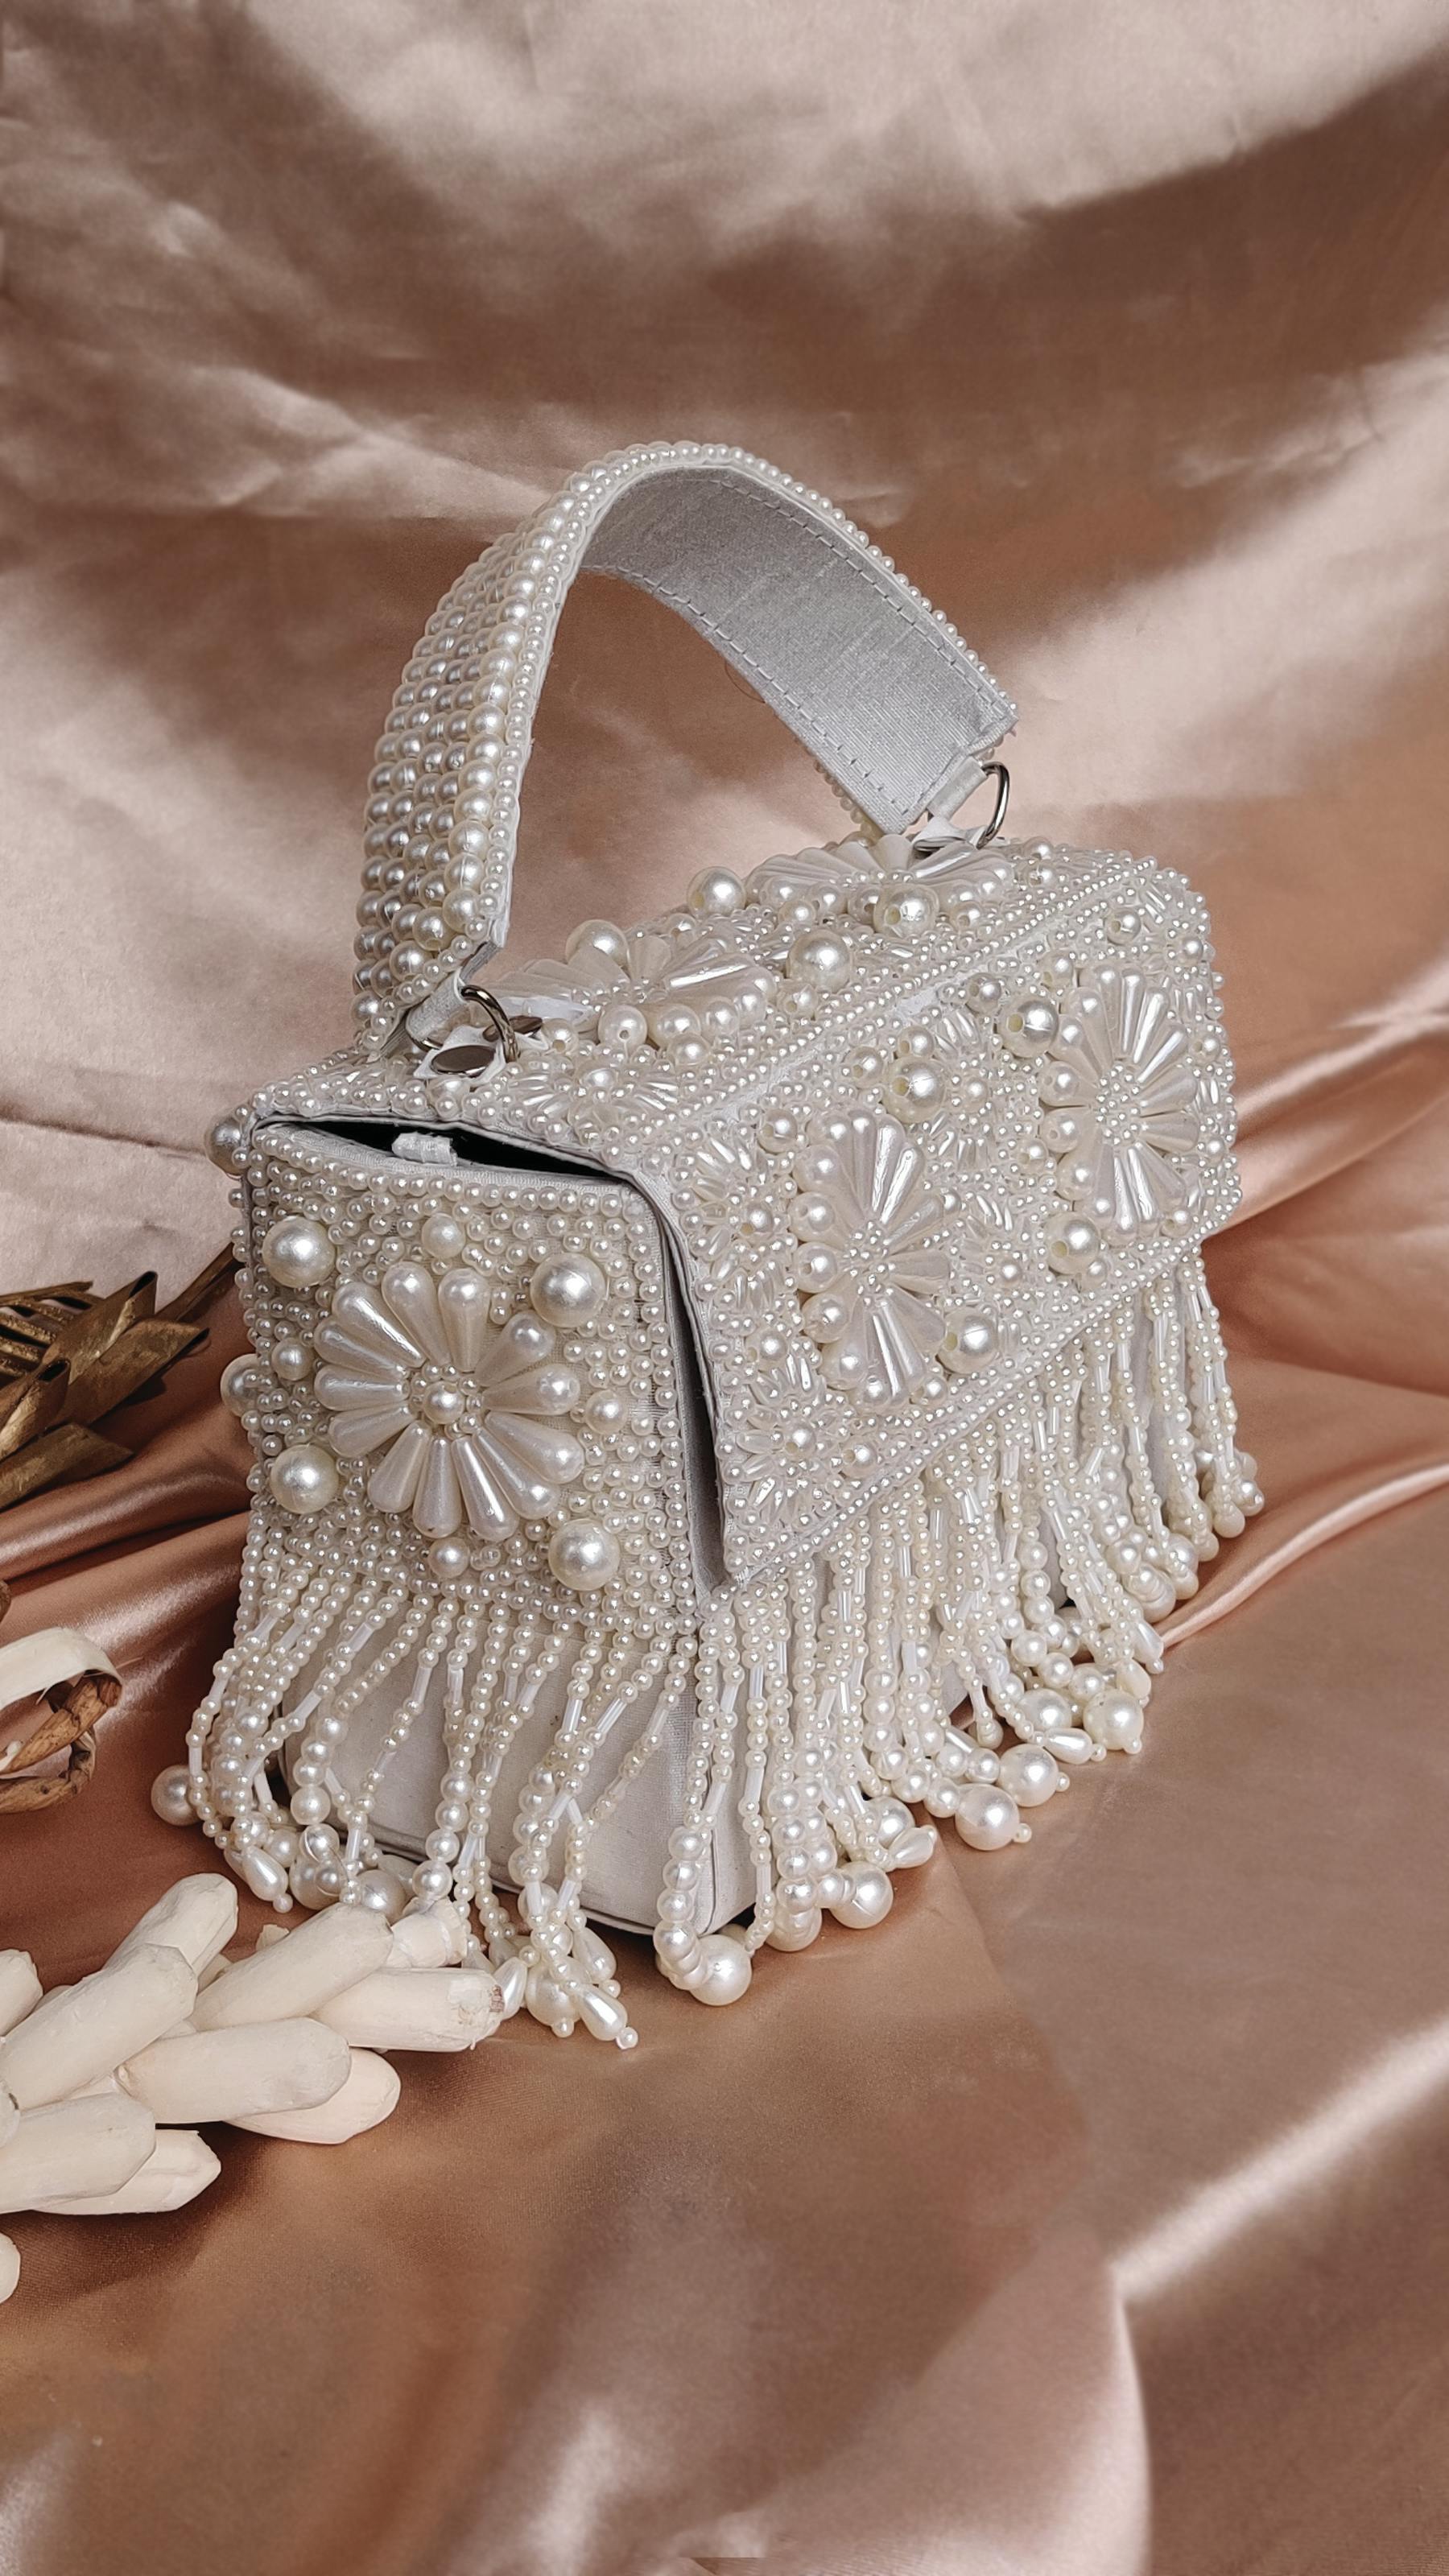 The EMMA Pearl Bag, a product by Clutcheeet